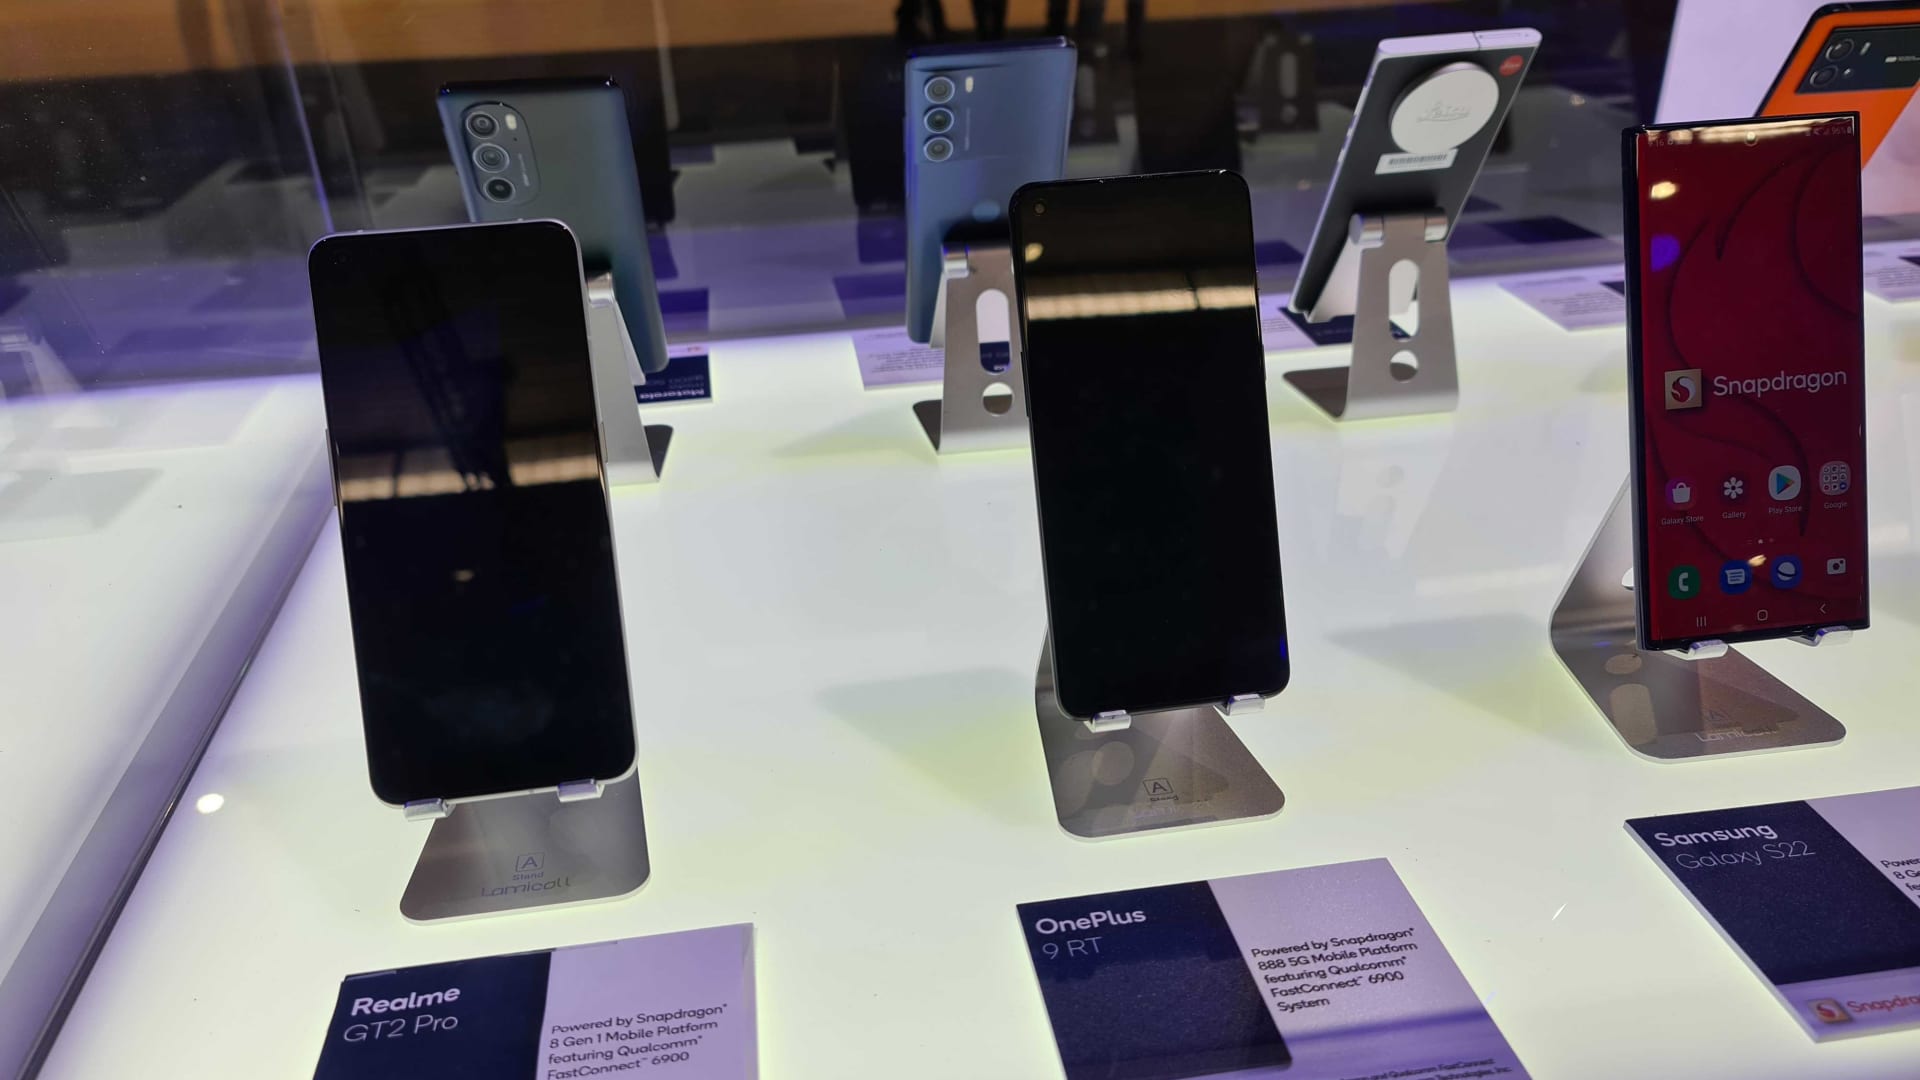 Smartphones on display at Qualcomm's MWC stand.